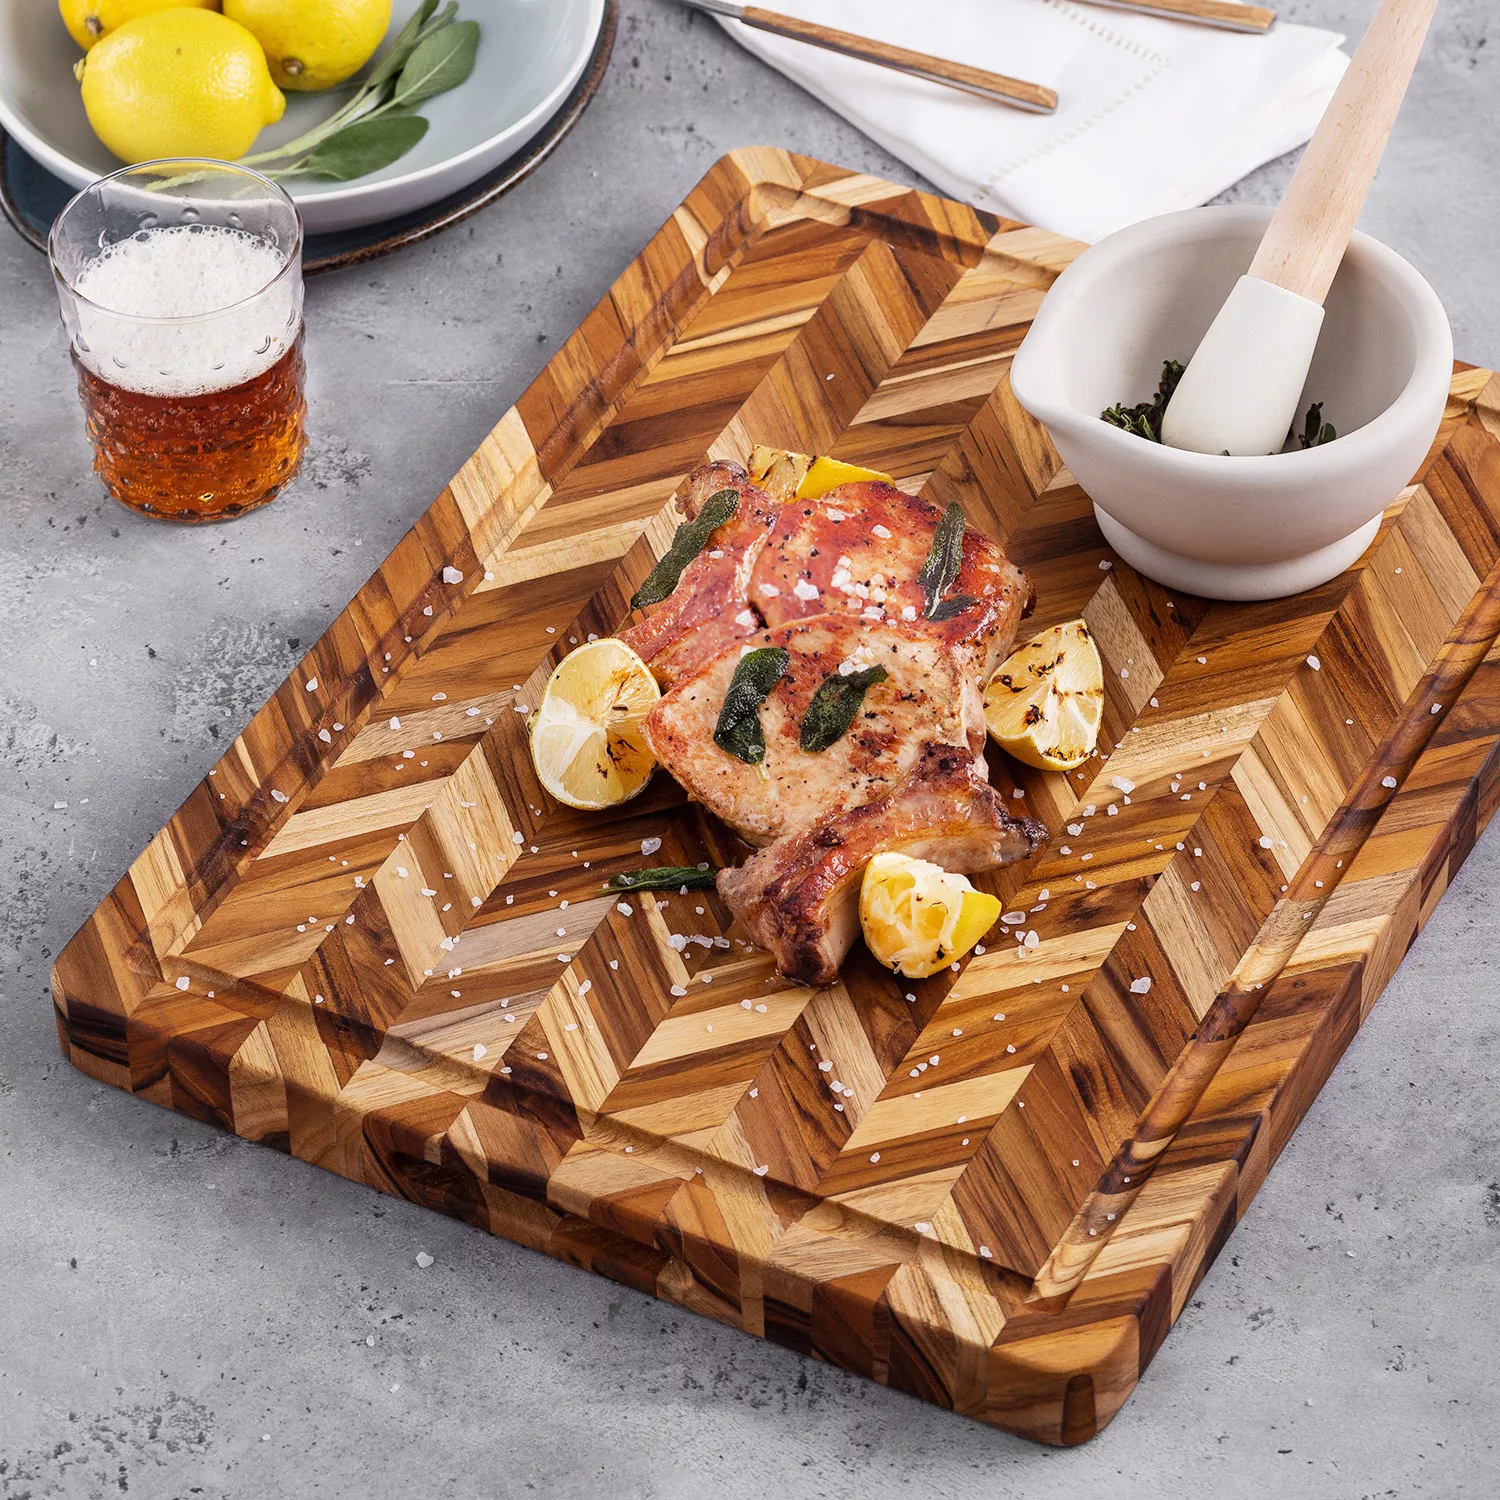 3-Piece Natural Rectangle Shape Real Teak Wood Durable Hard Wooden Cutting Chopping Board Set with Juice Groove